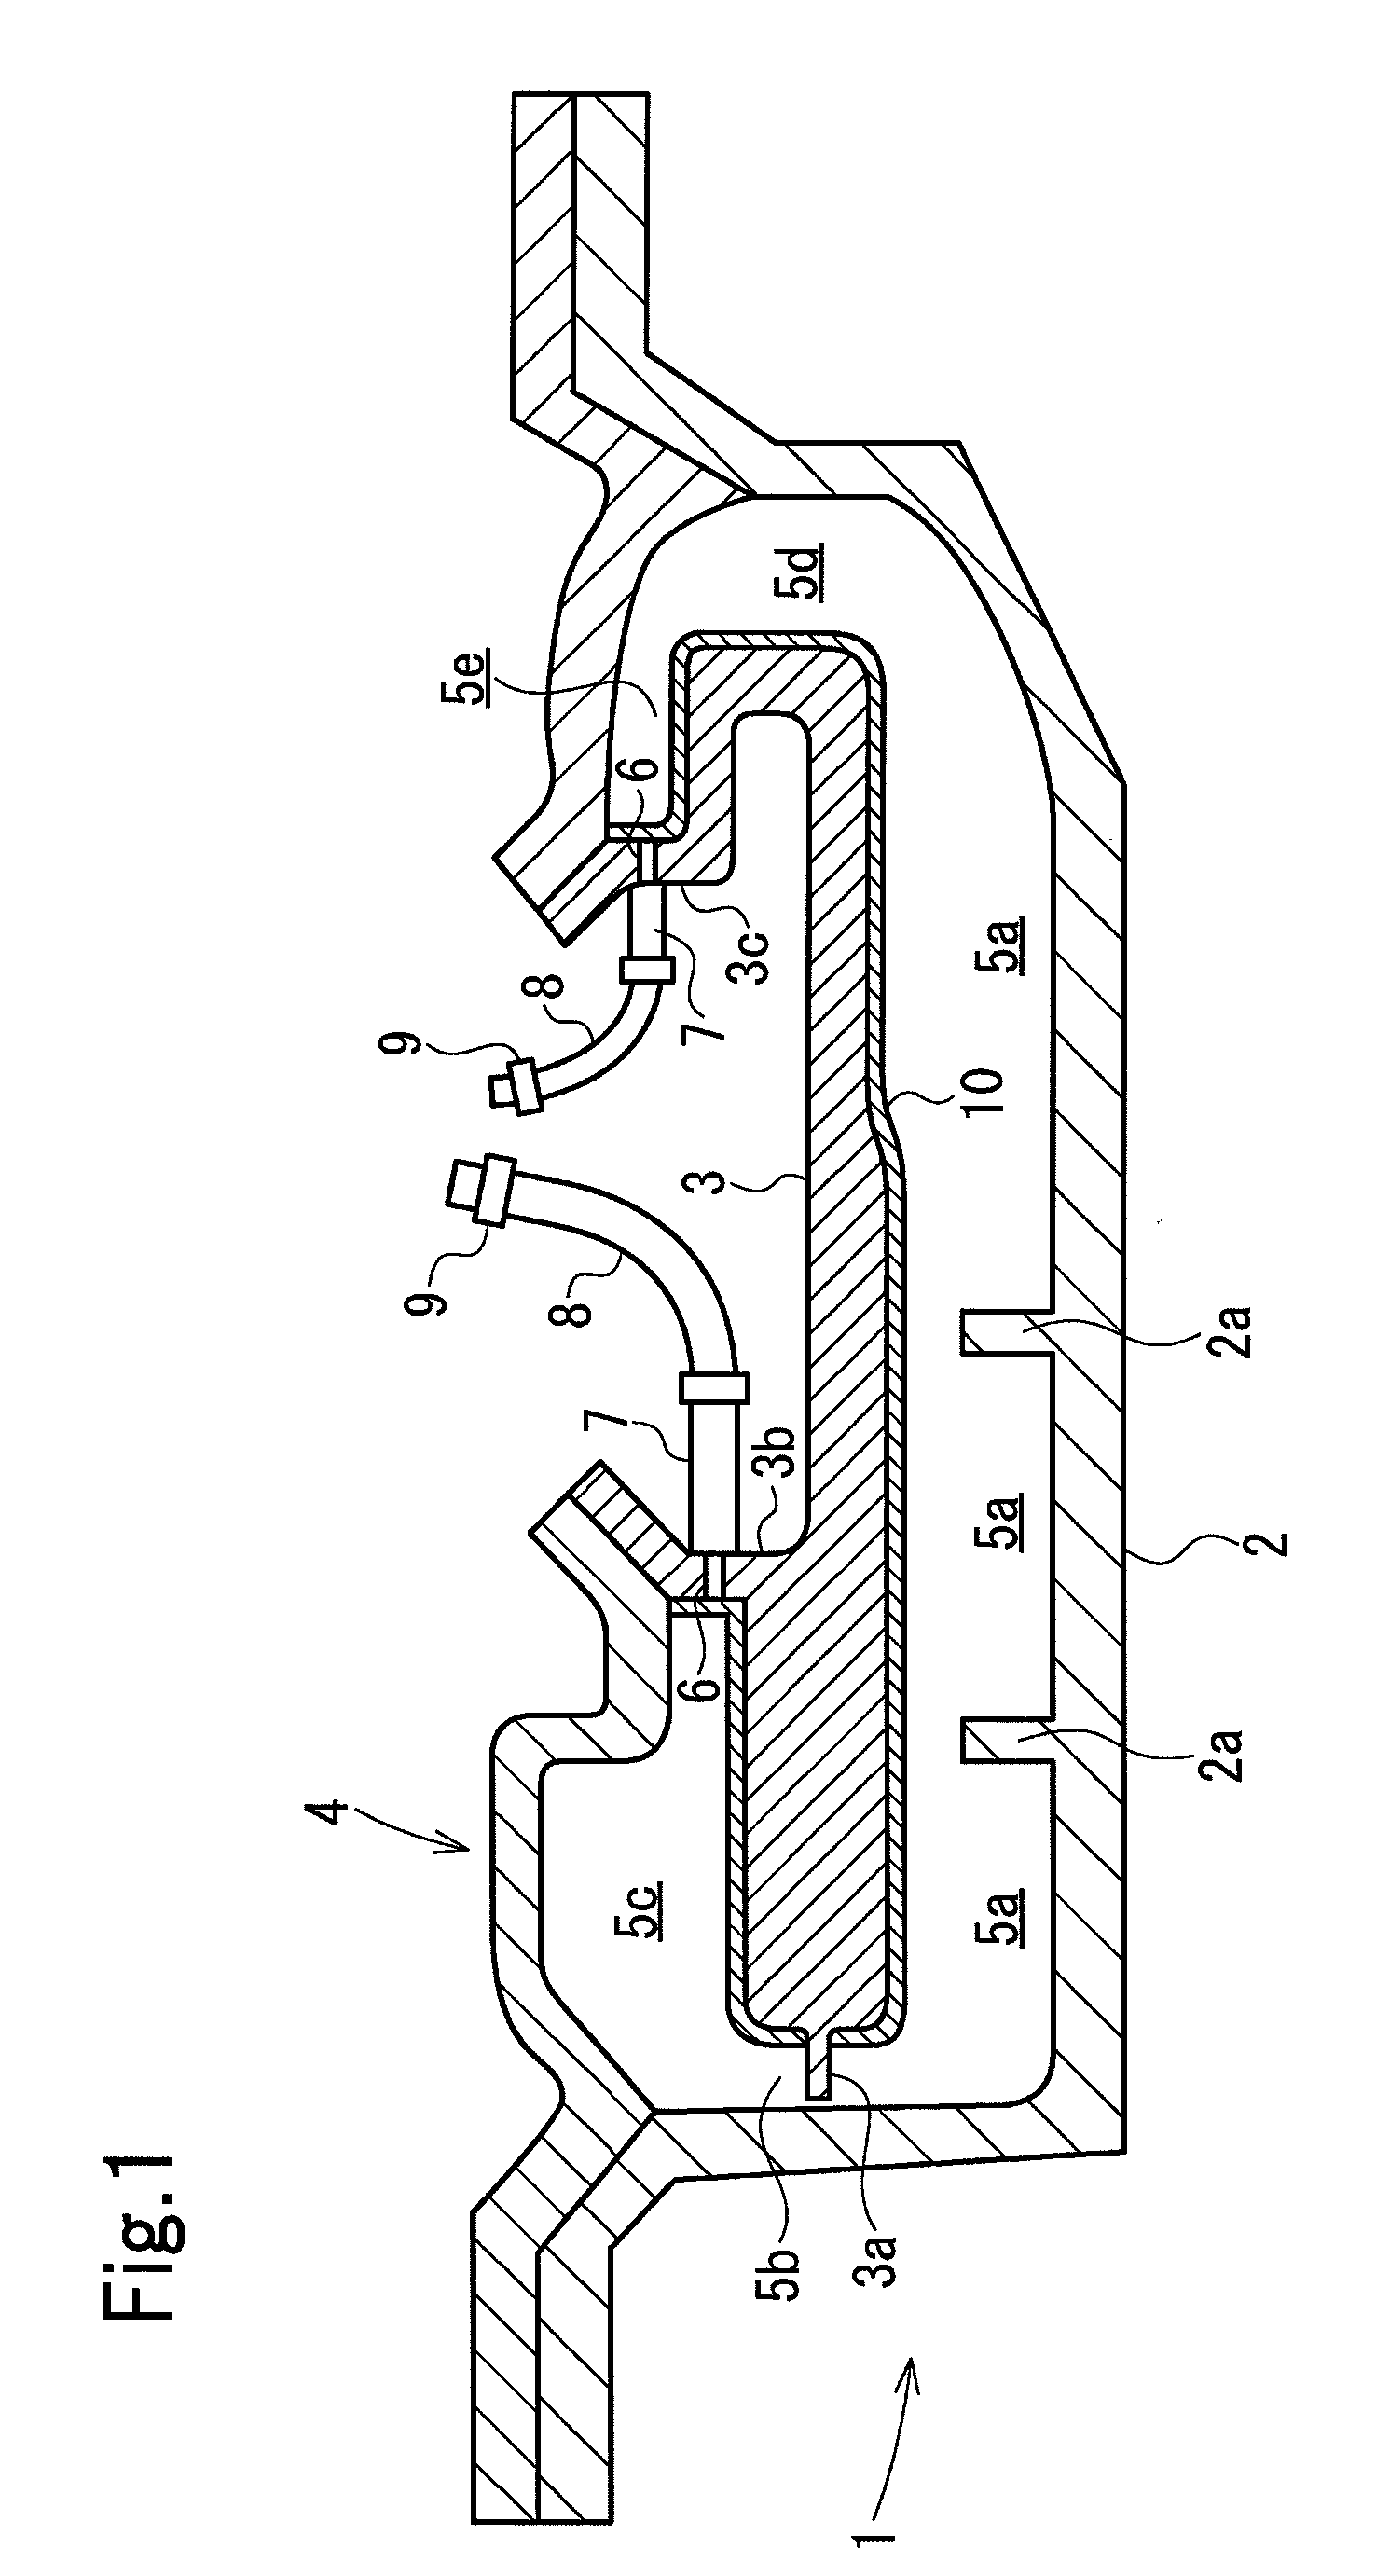 Mold and method for molding resin foamed molding